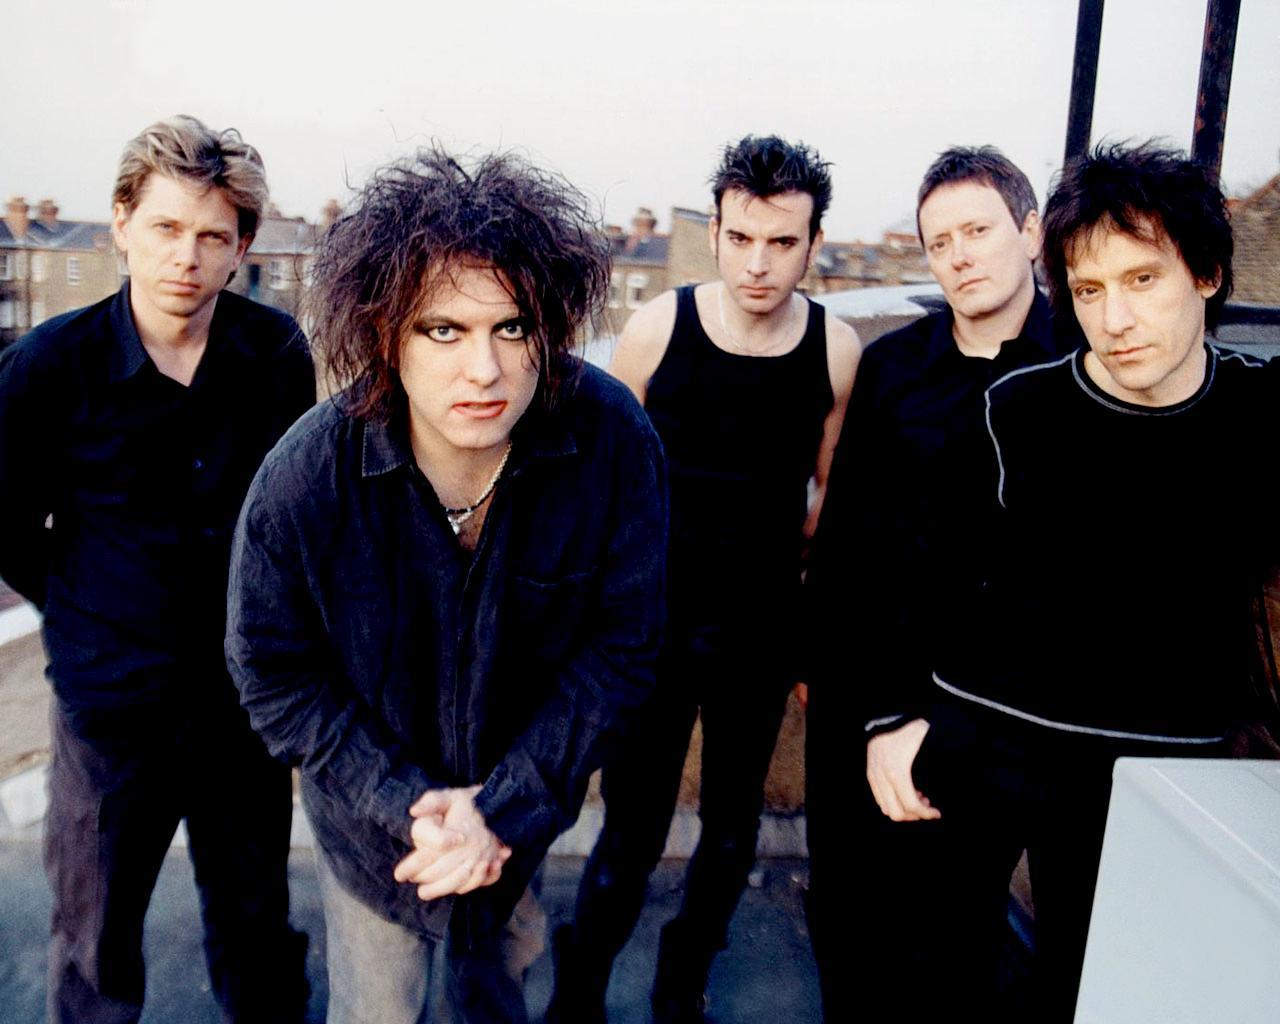 500x250px The Cure 62.99 KB